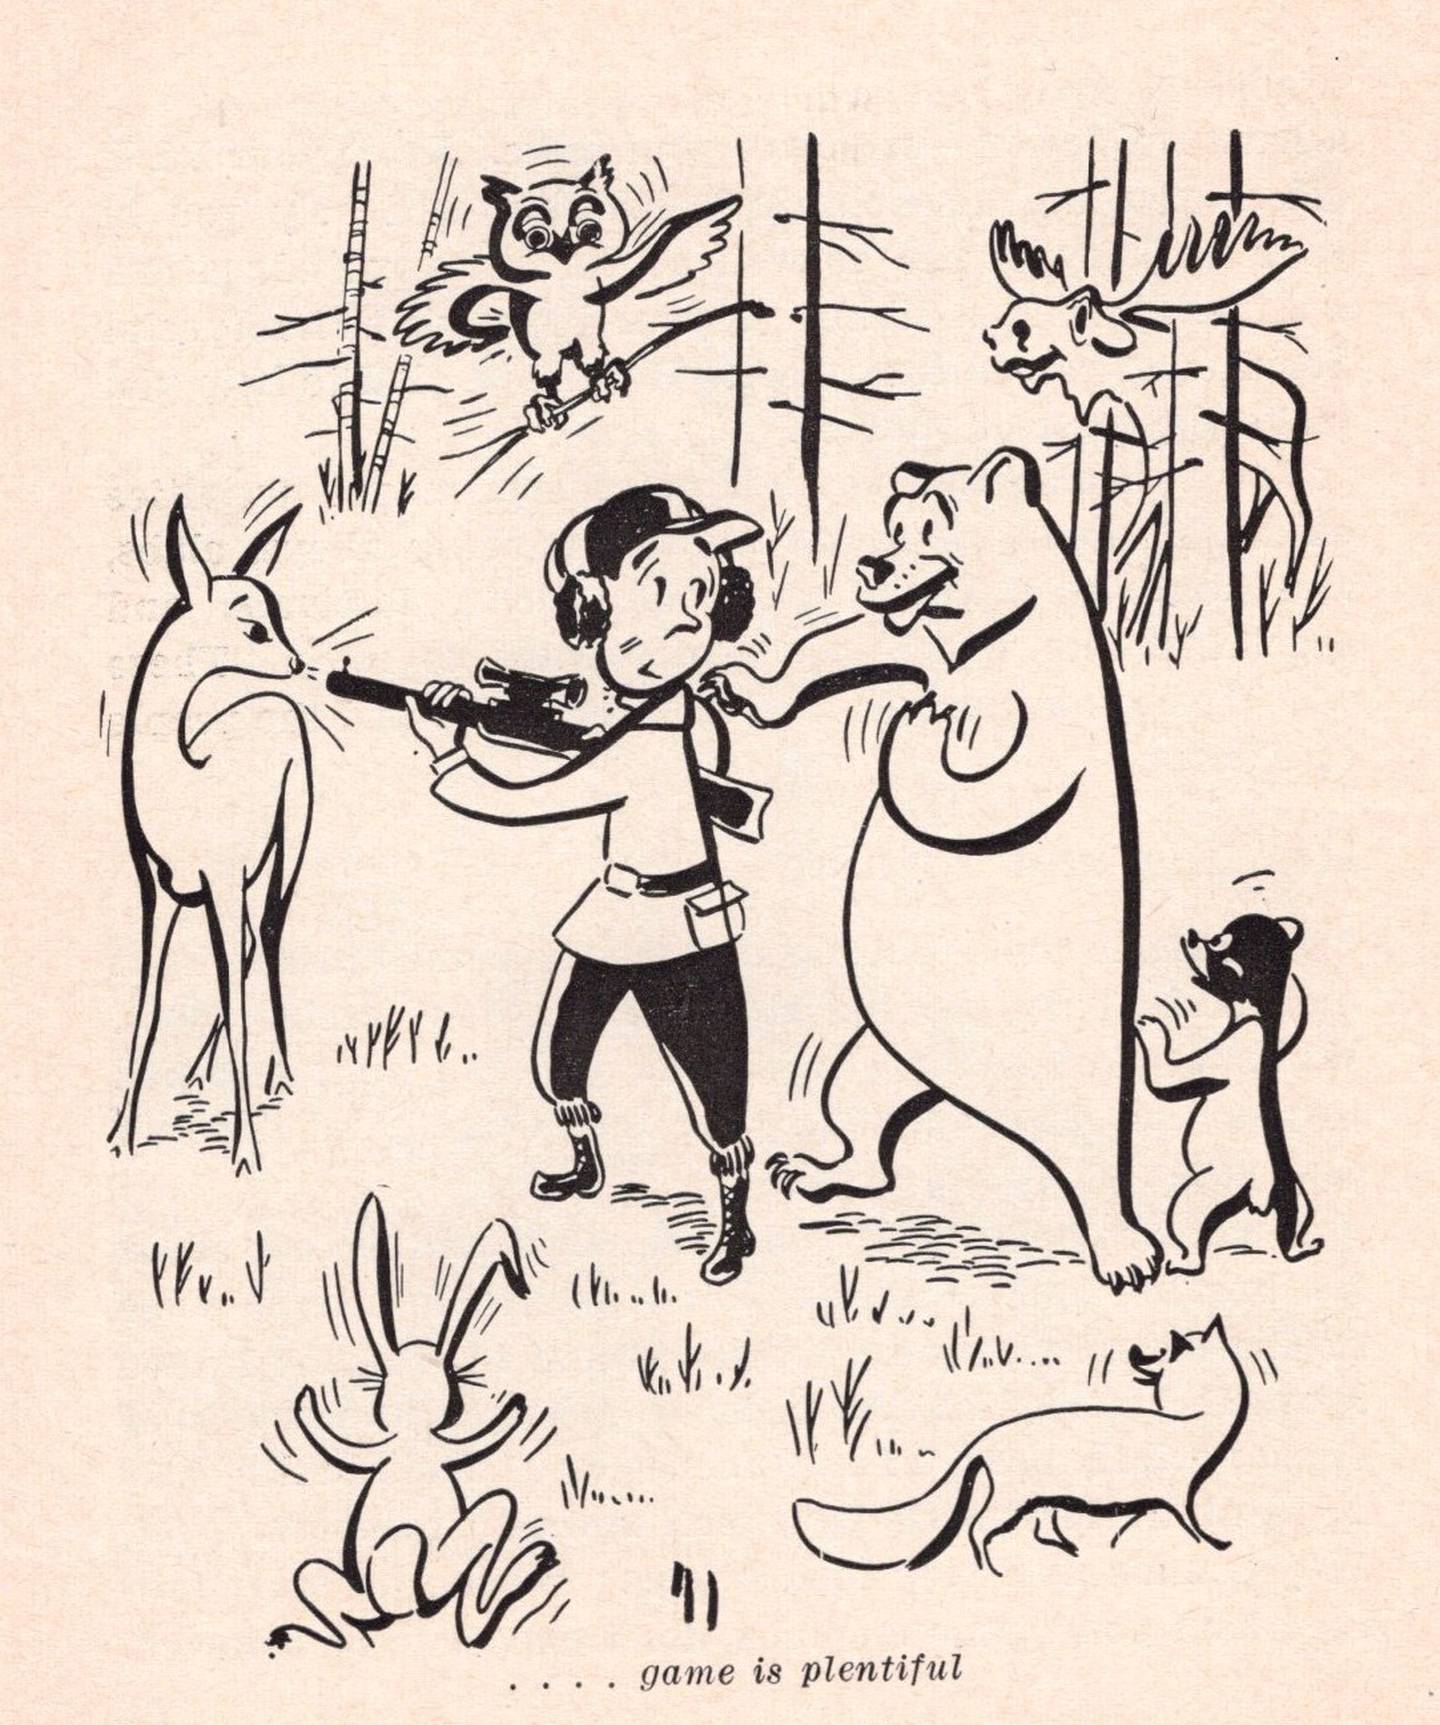 An illustration from the 1956 Pocket Guide to Alaska